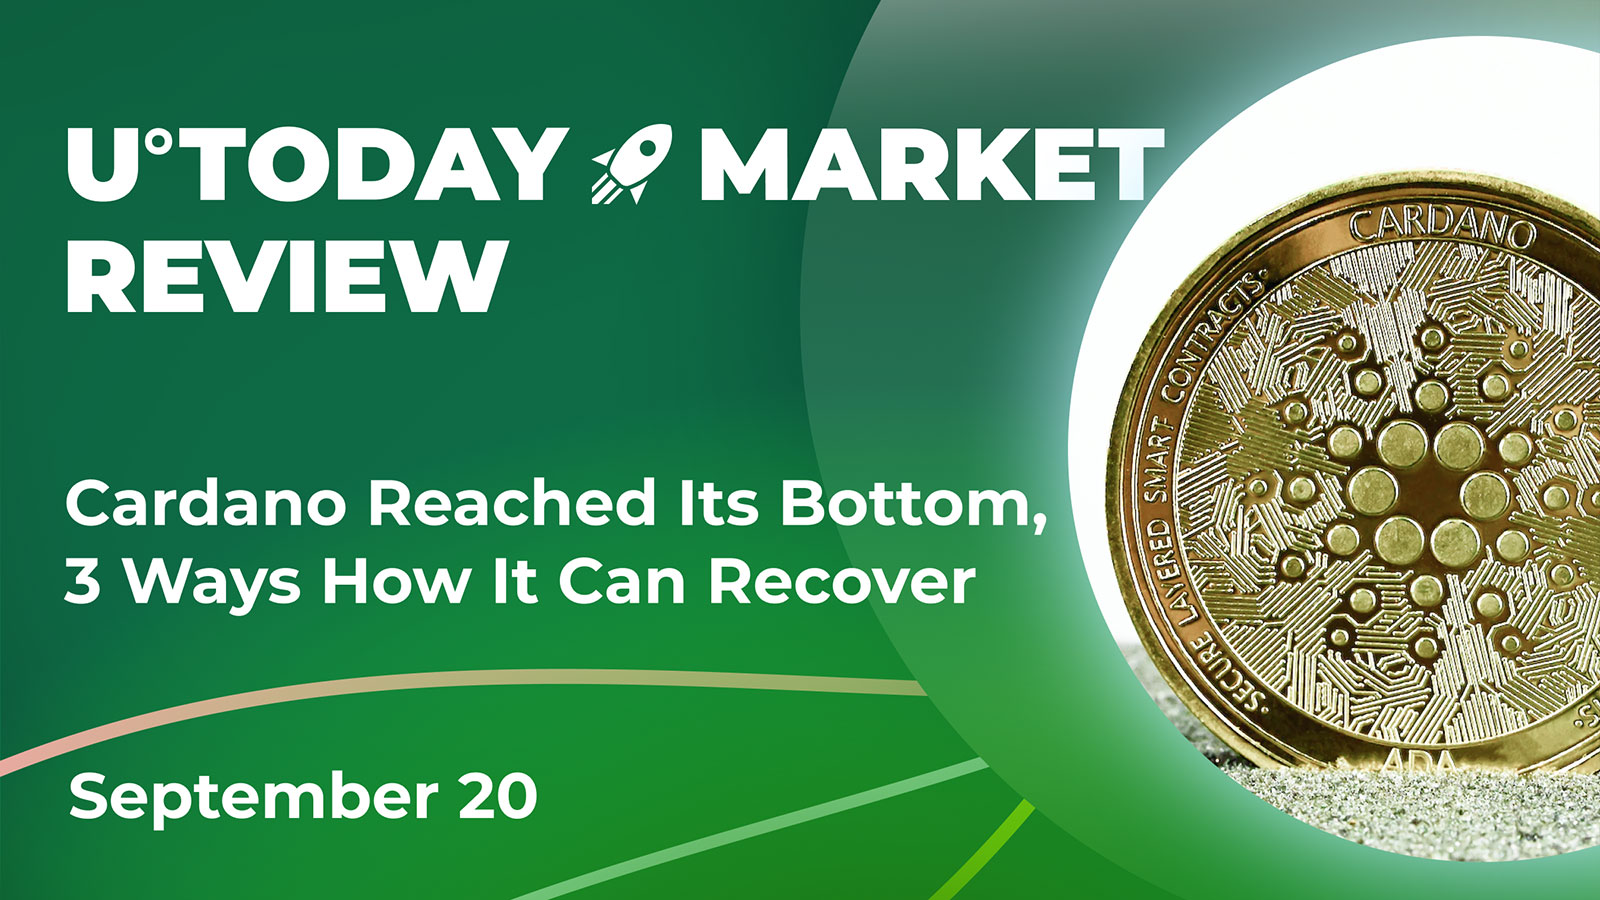 Cardano Reached Its Bottom, 3 Ways How It can Recover: Crypto Market Review, September 20